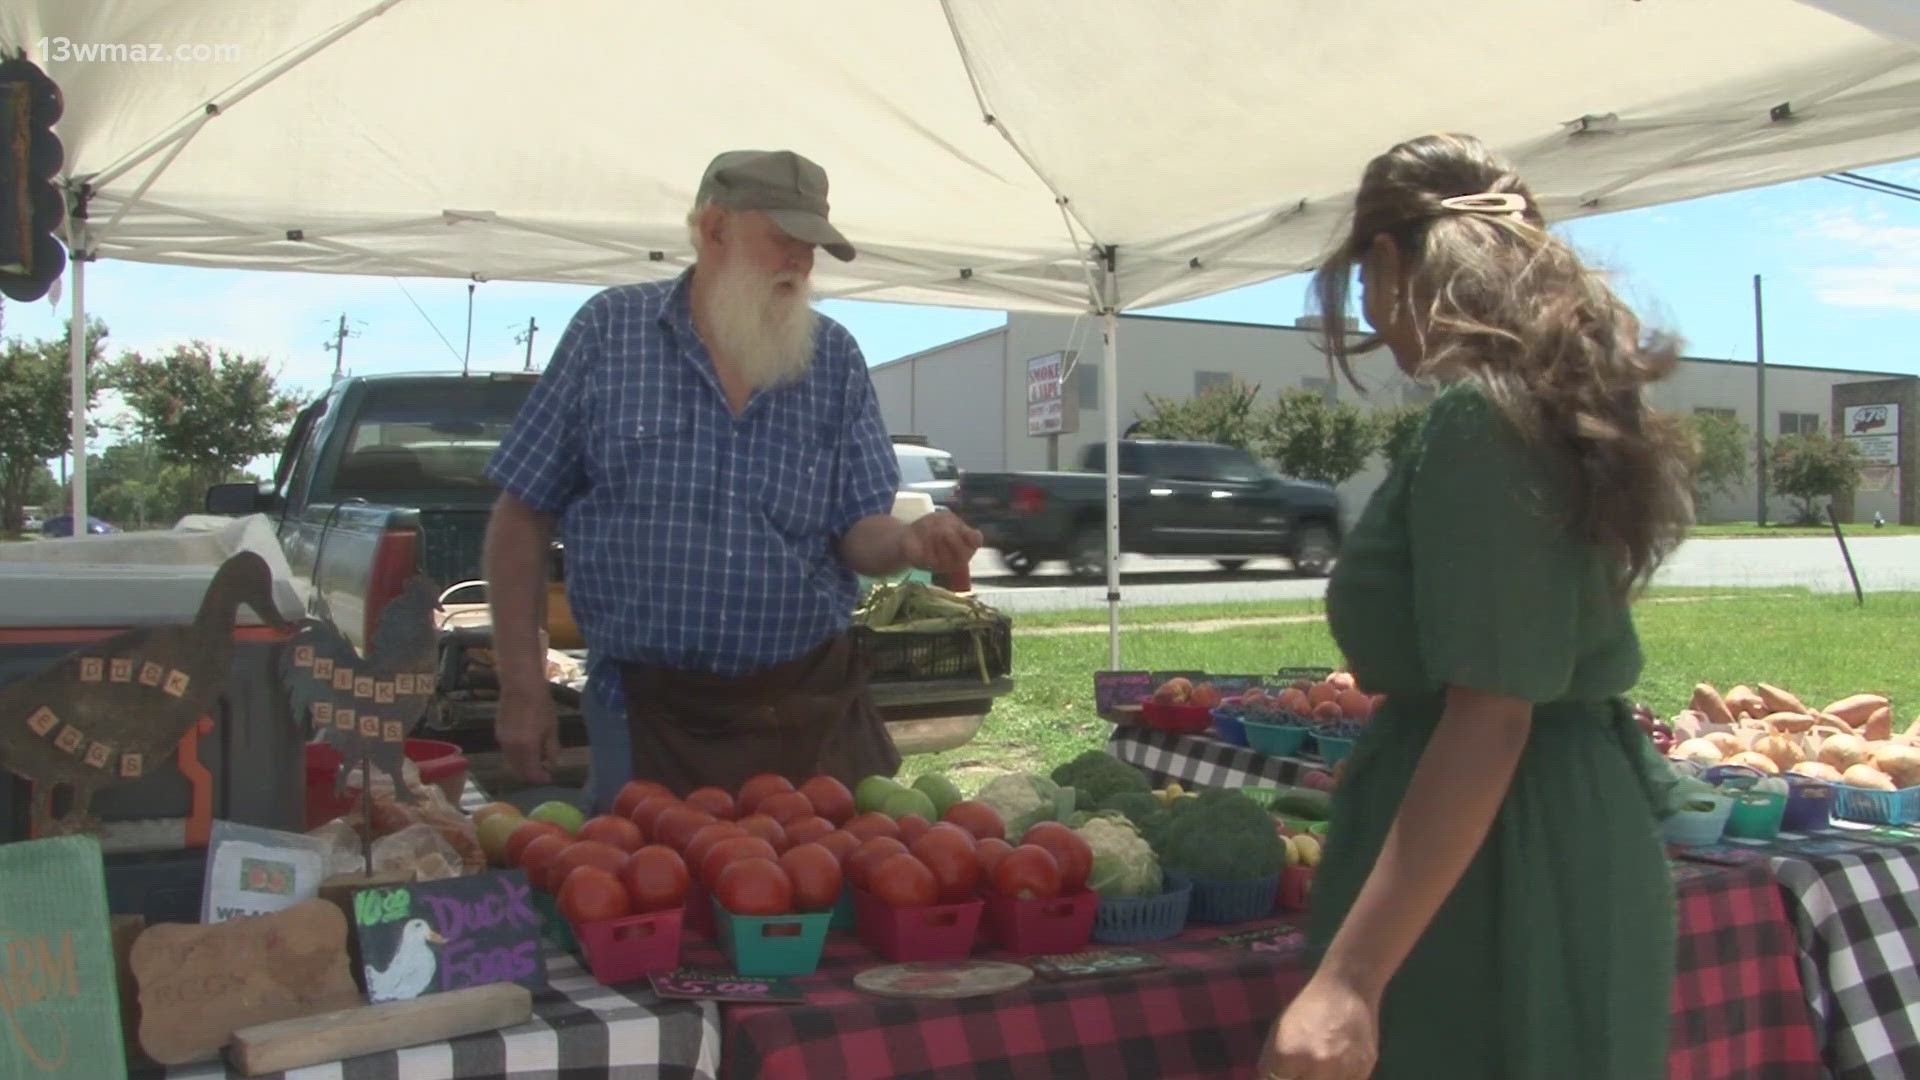 For those who have EBT credit, the International City Farmers Market offers locally-grown produce at a discounted rate.